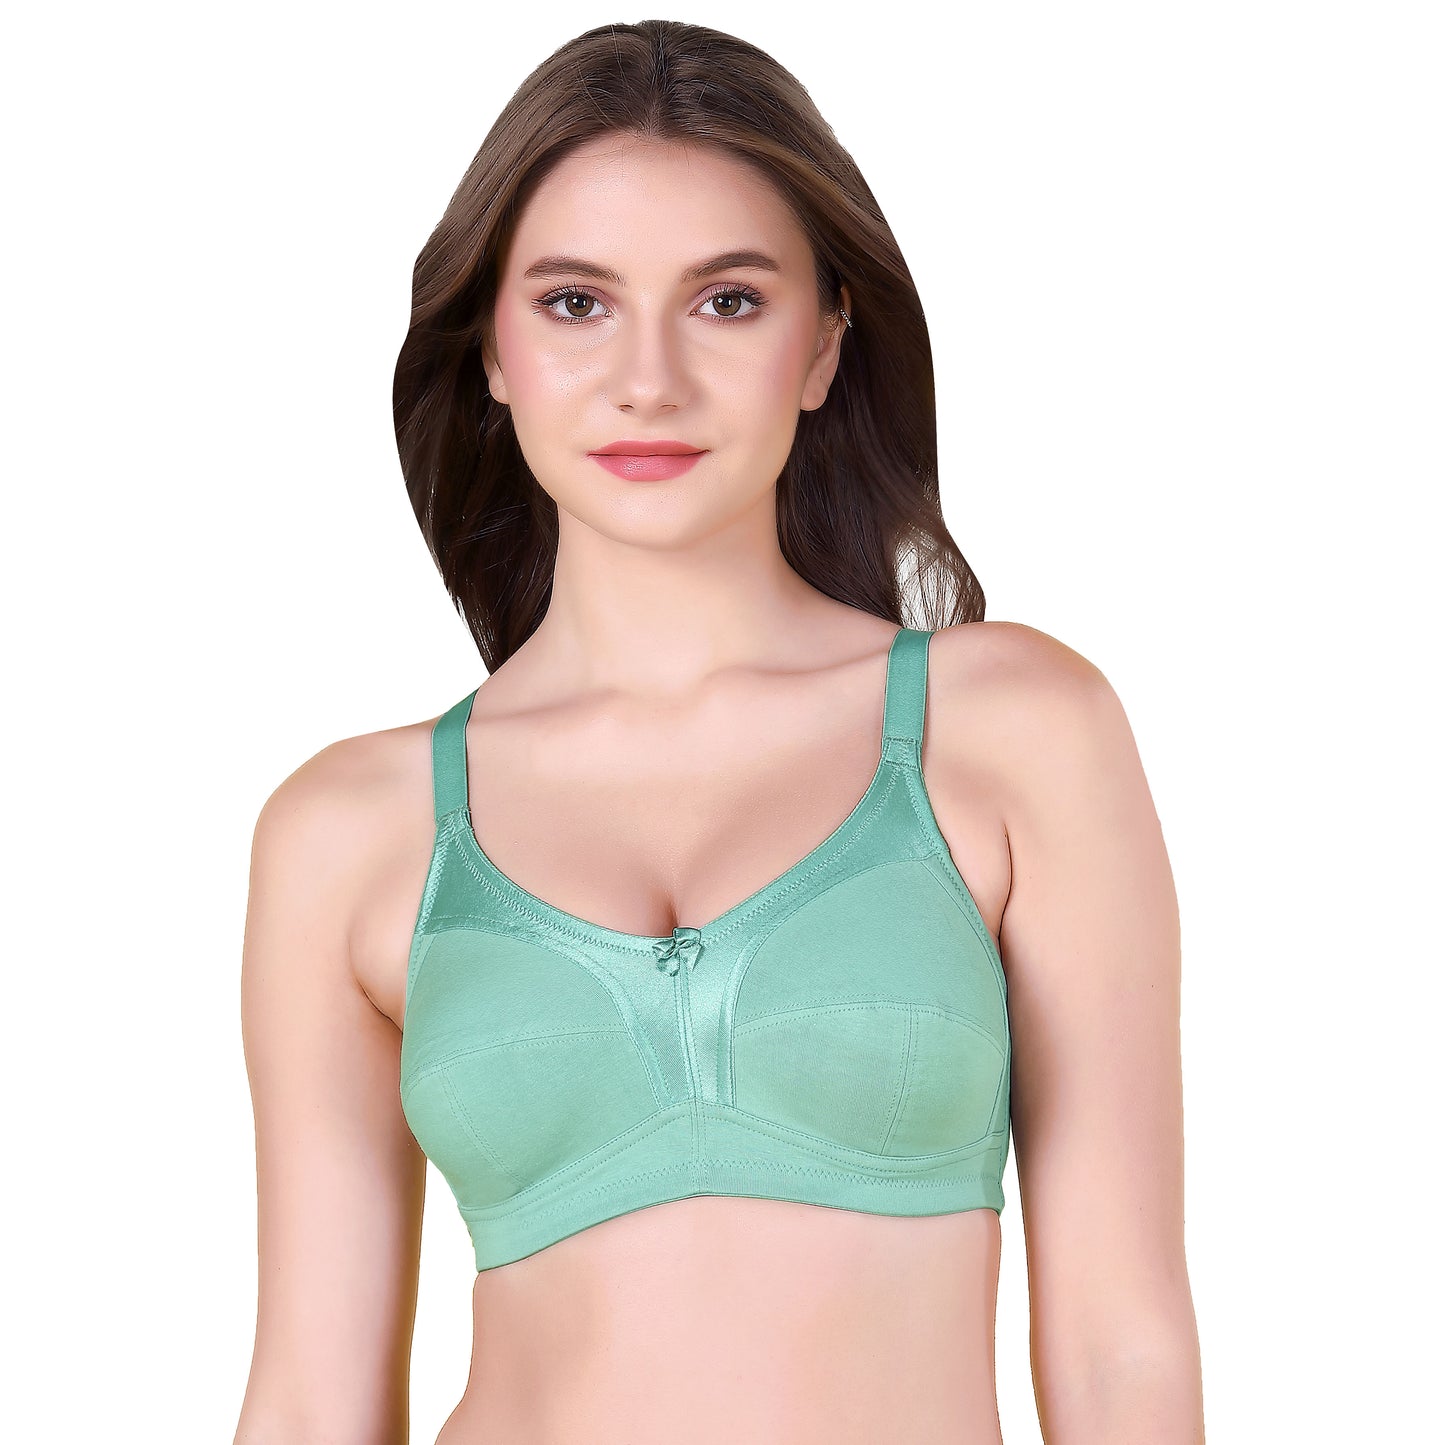 ZOLA BRA / D-CUP / NON-PADDED / NON-WIRED / FULL CUP BRA / T-SHIRT BRA / HIGH SUPPORT BRA